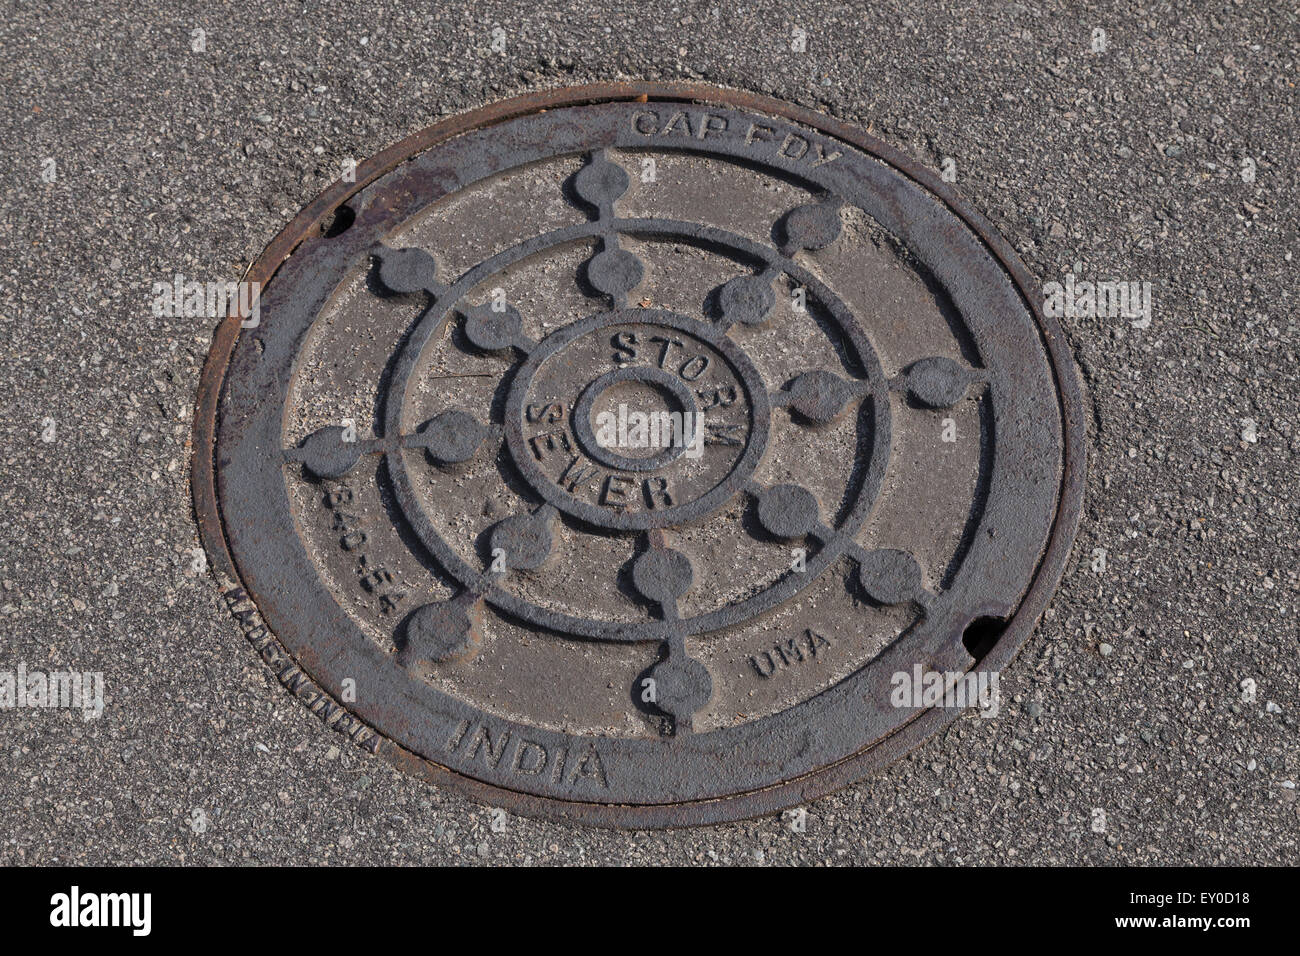 Storm Sewer manhole cover Stock Photo